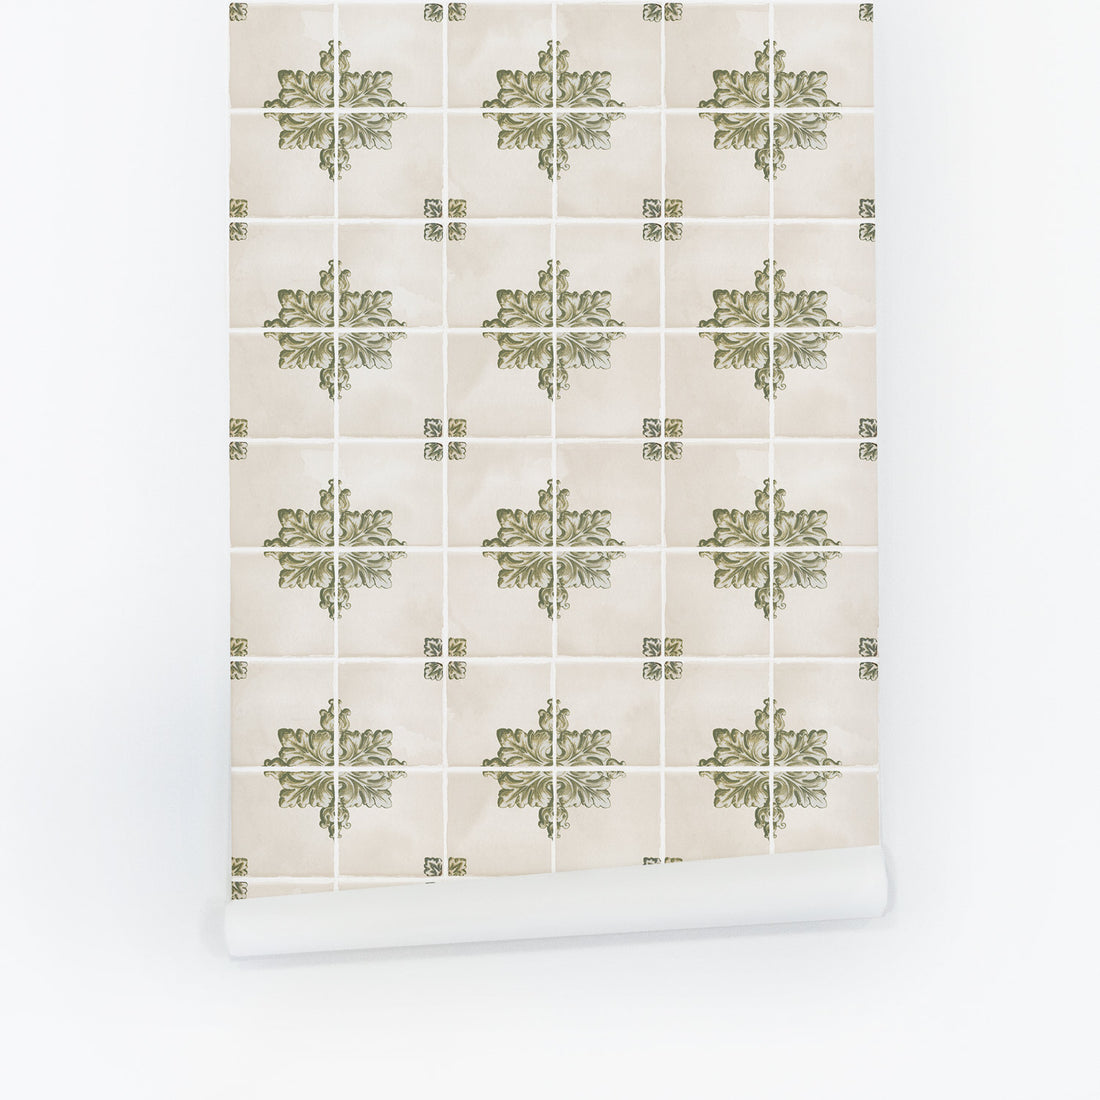 Green and beige colored vintage Italian tile design removable wallpaper by Livette's Wallpaper